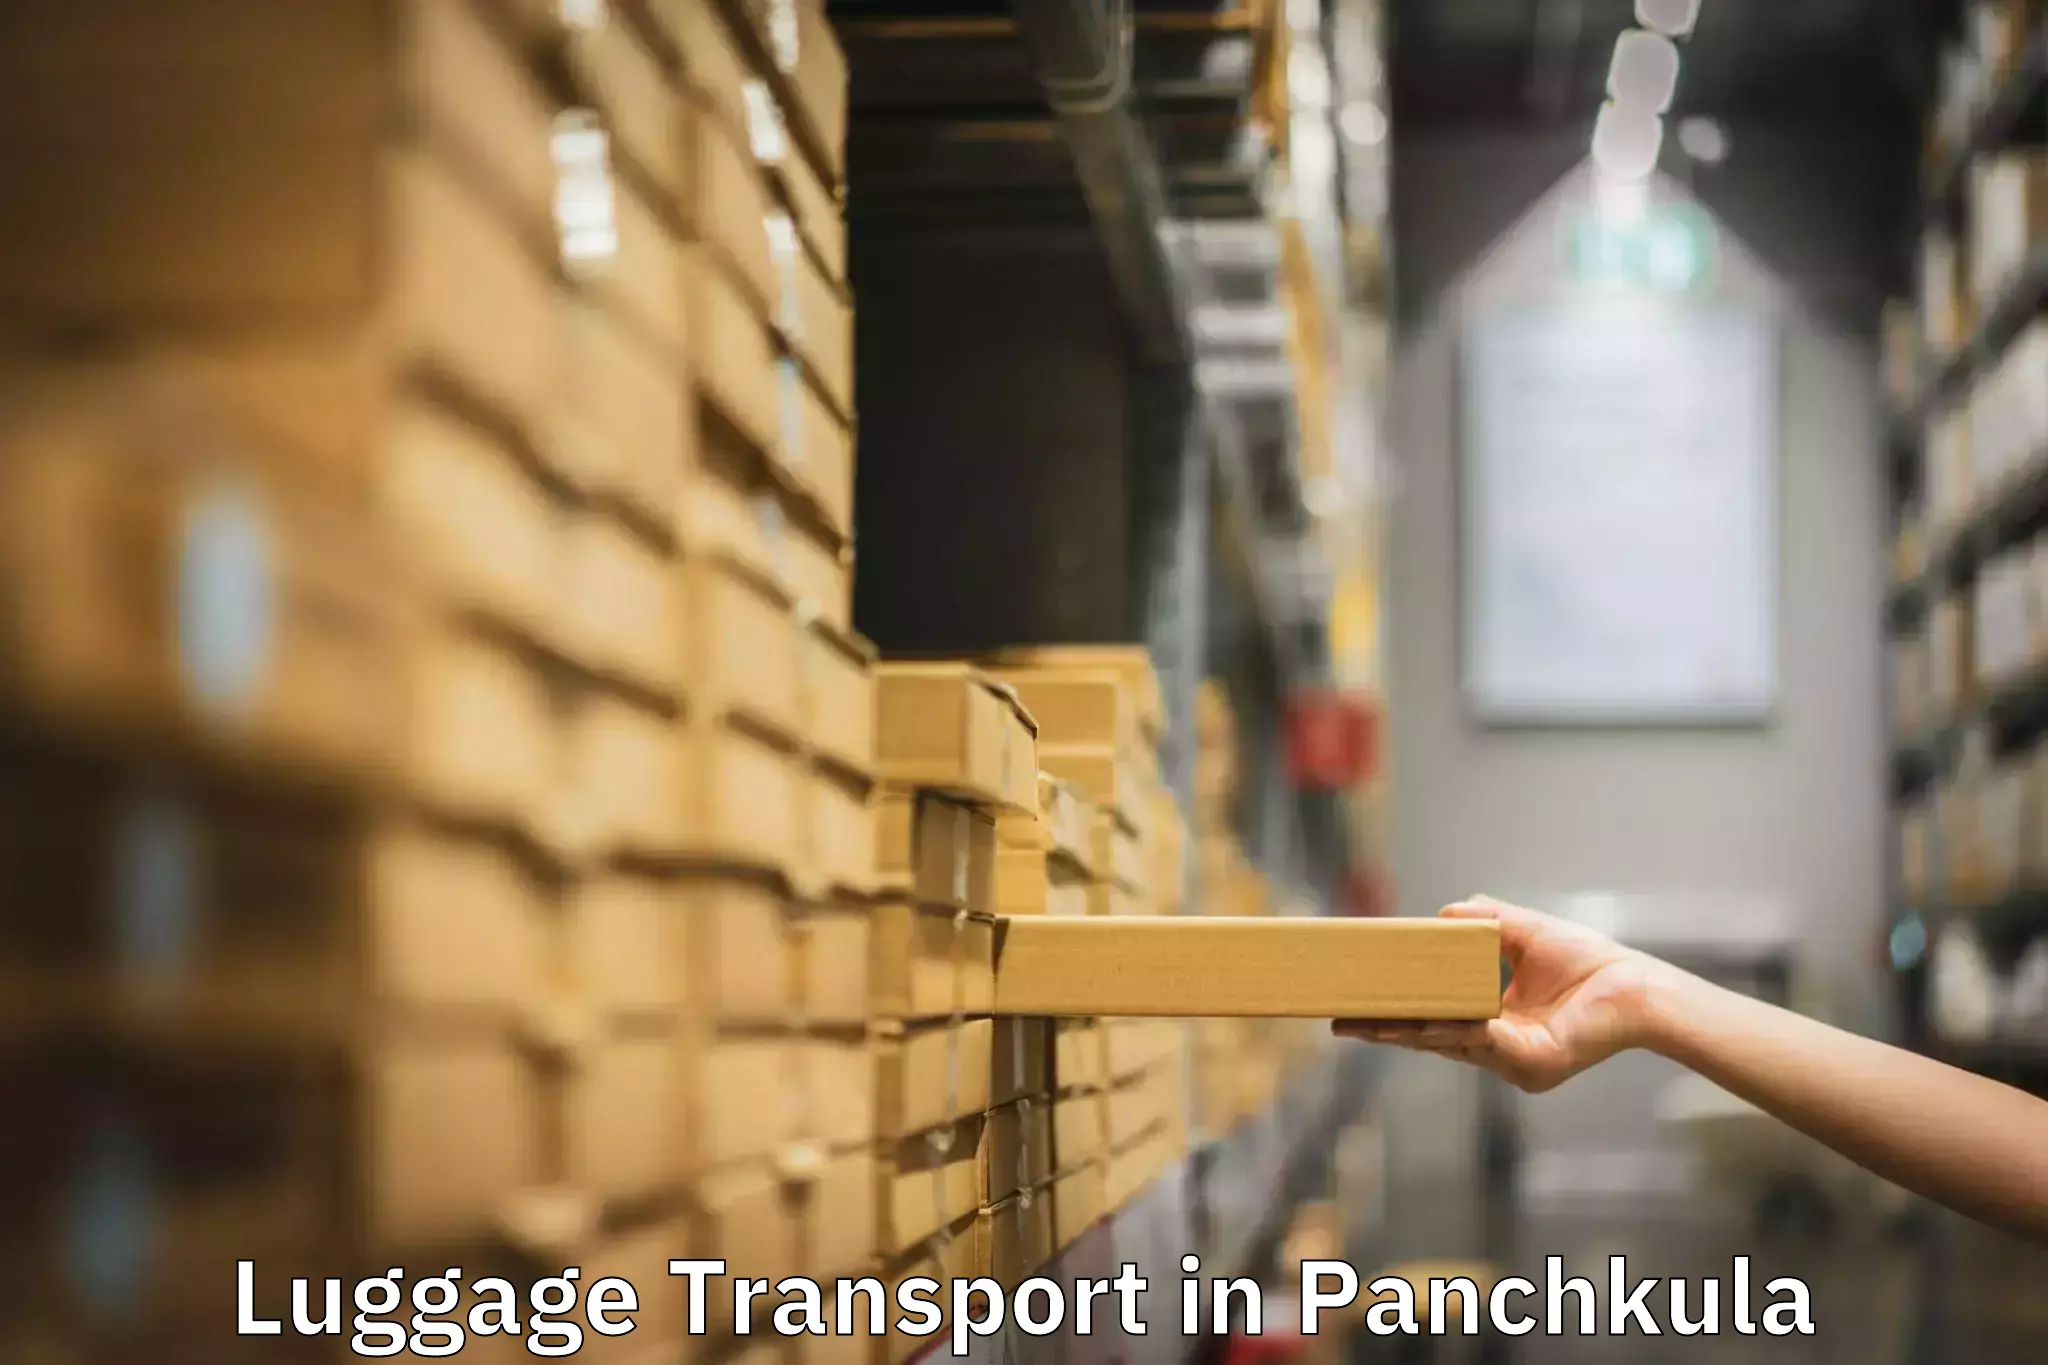 Luggage transport solutions in Panchkula